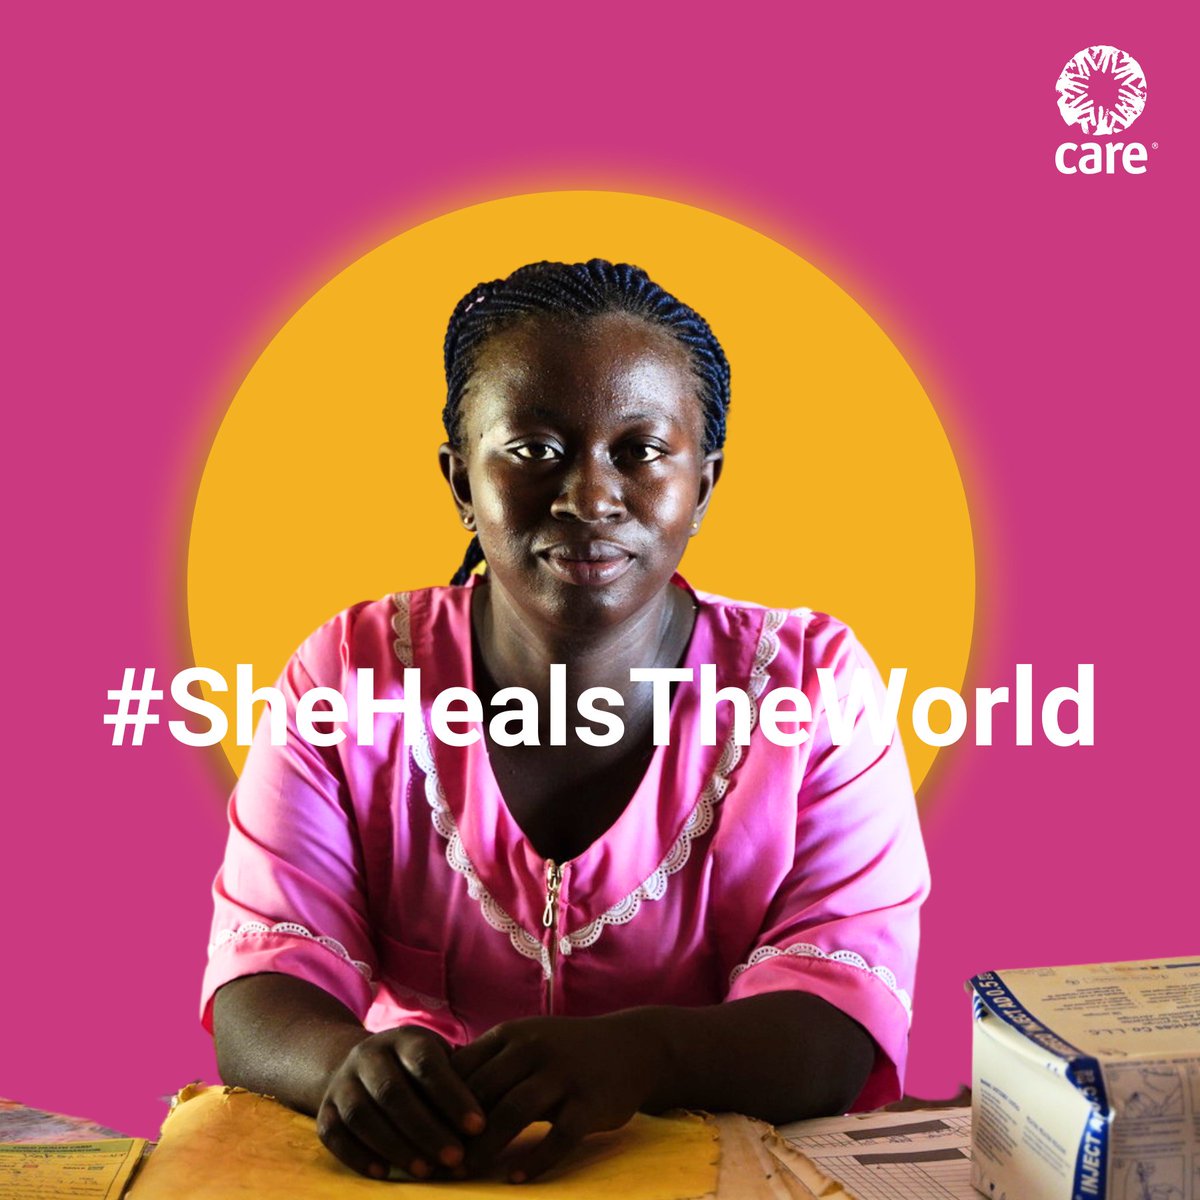 Frontline community health workers are the backbone of strong, healthy societies, and 70% of them are women! That’s why we’re telling the #WorldHealthAssembly that #SheHealsTheWorld. Learn more at care.org/SheHeals